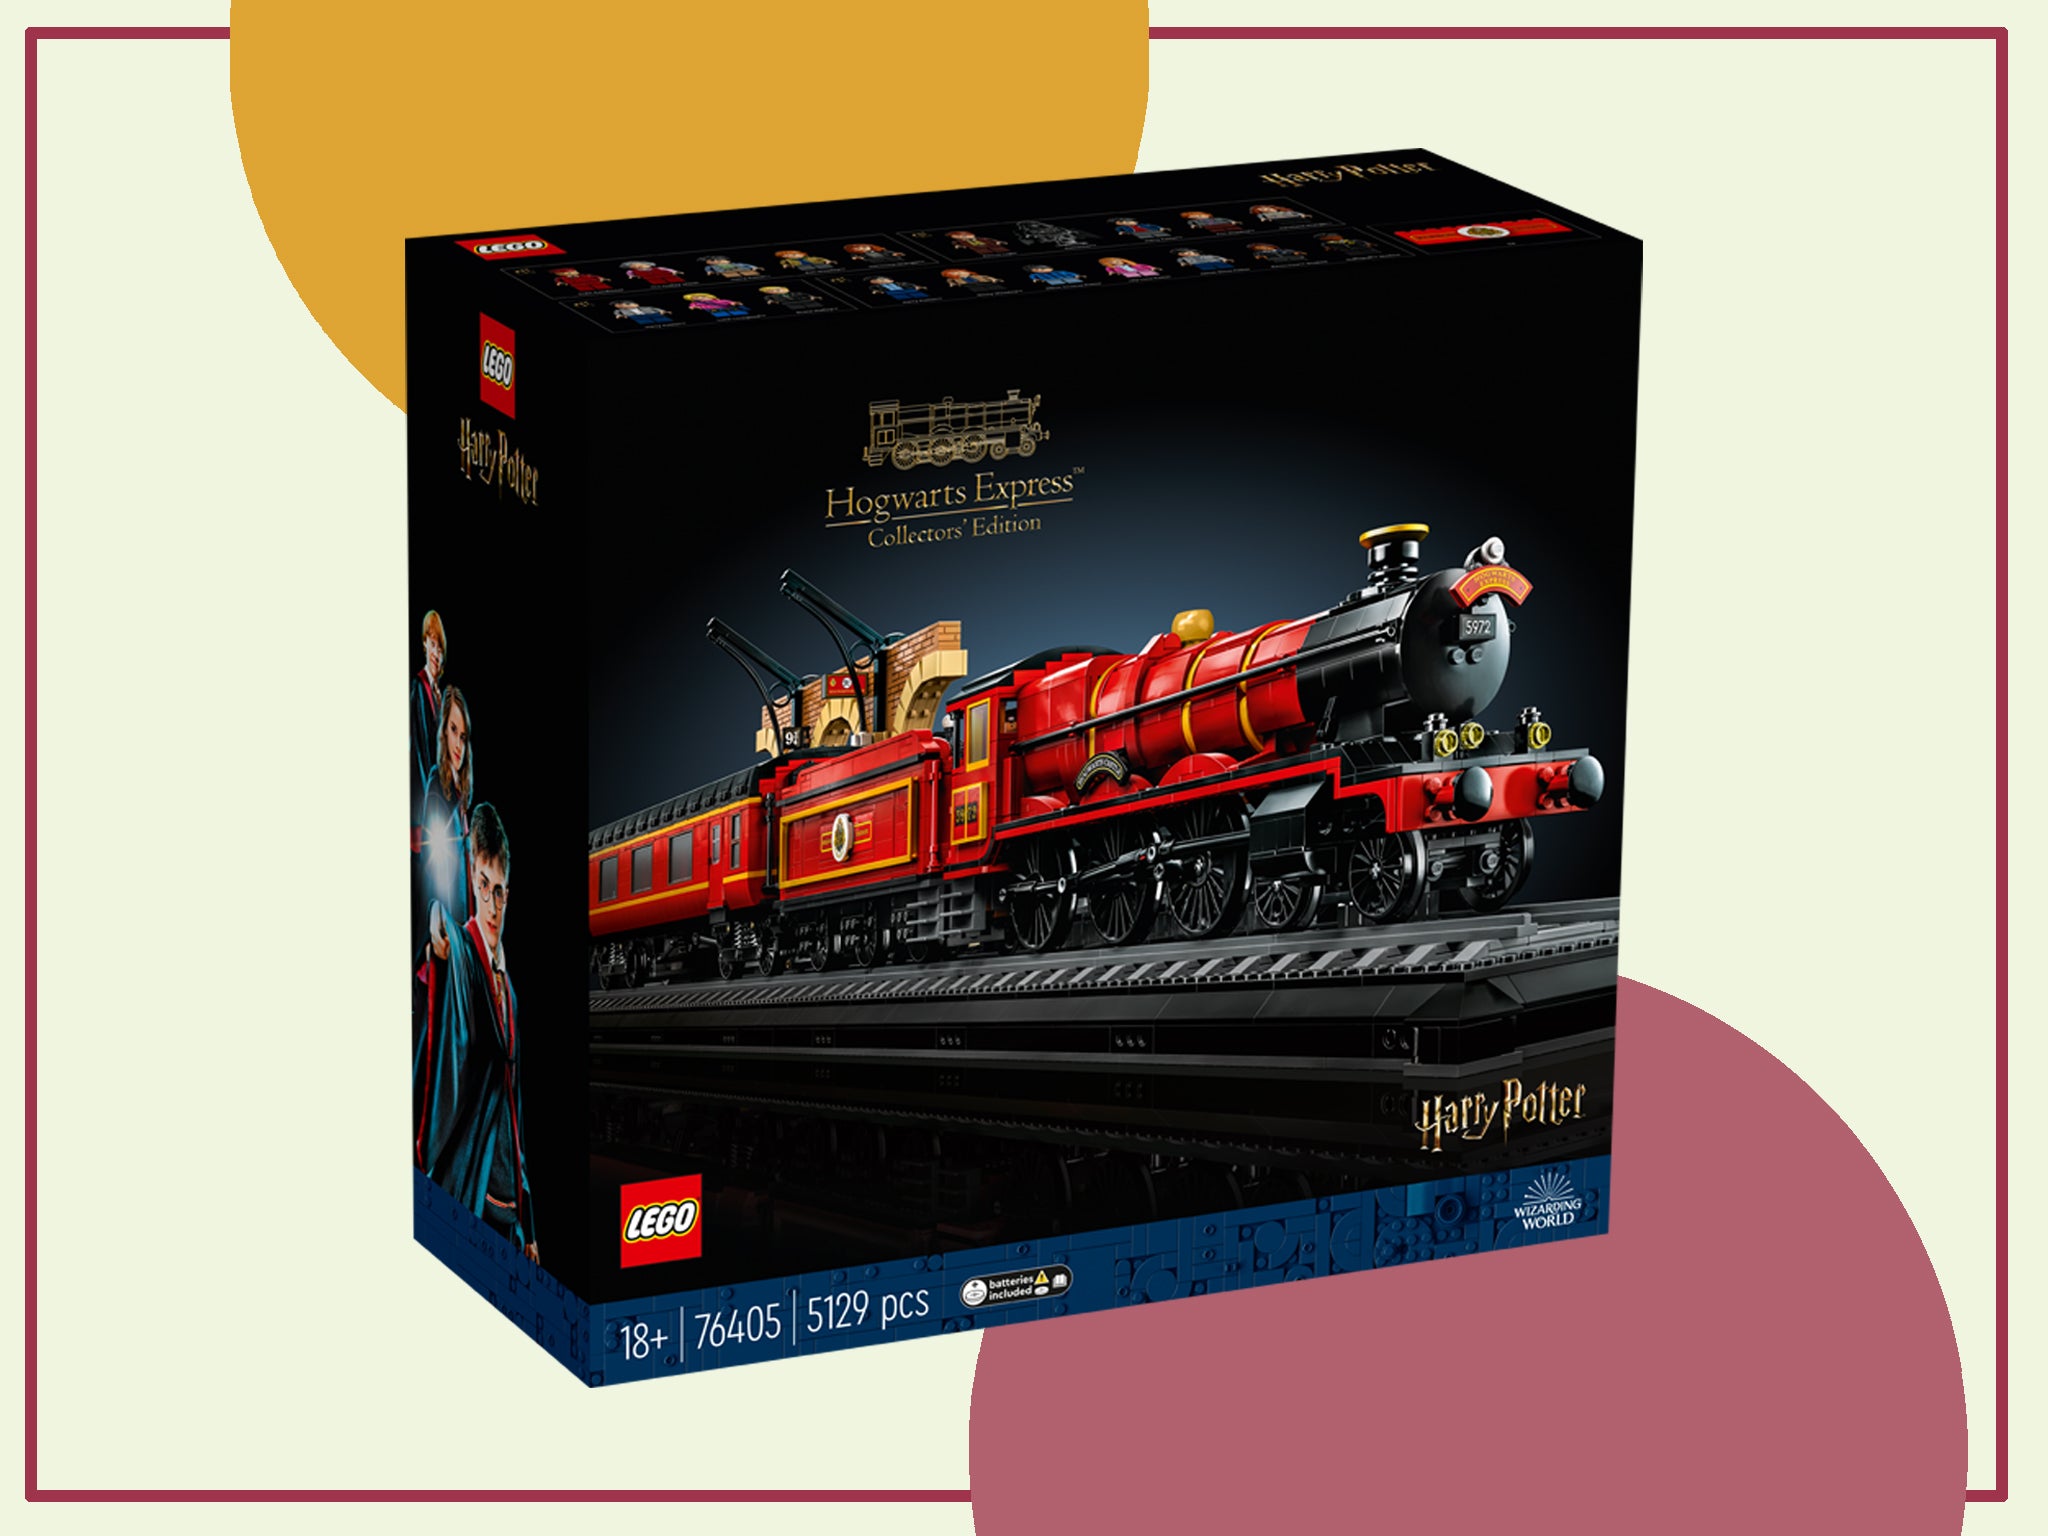 Lego announces new Harry Potter Hogwarts Express set – and there’s a competition to stay on the real train